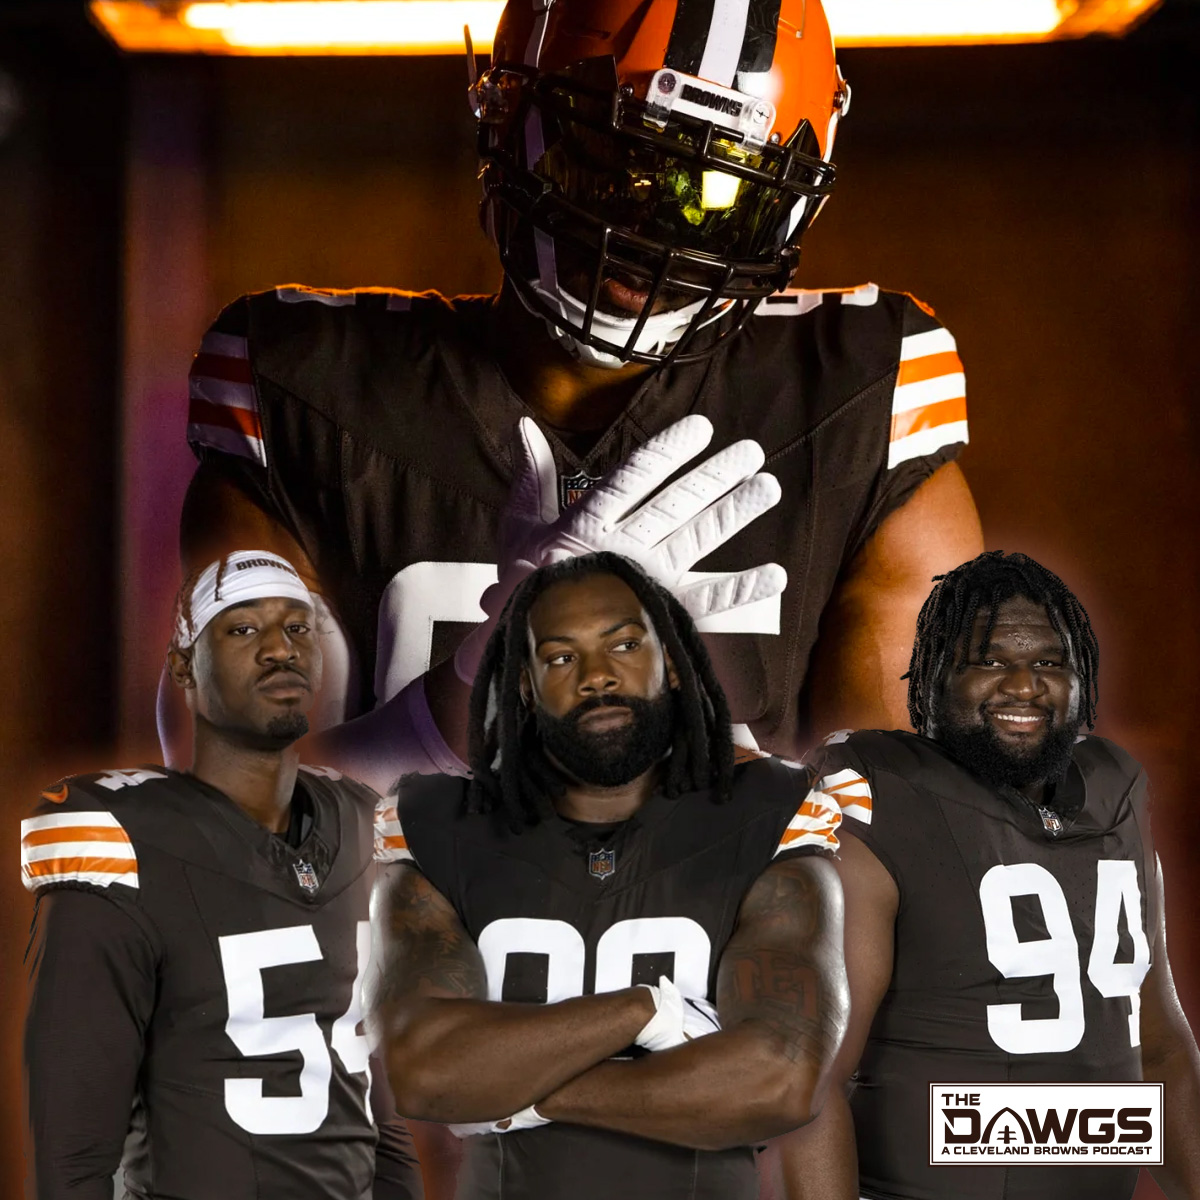 Tweets with replies by The Dawgs - A Cleveland Browns Podcast